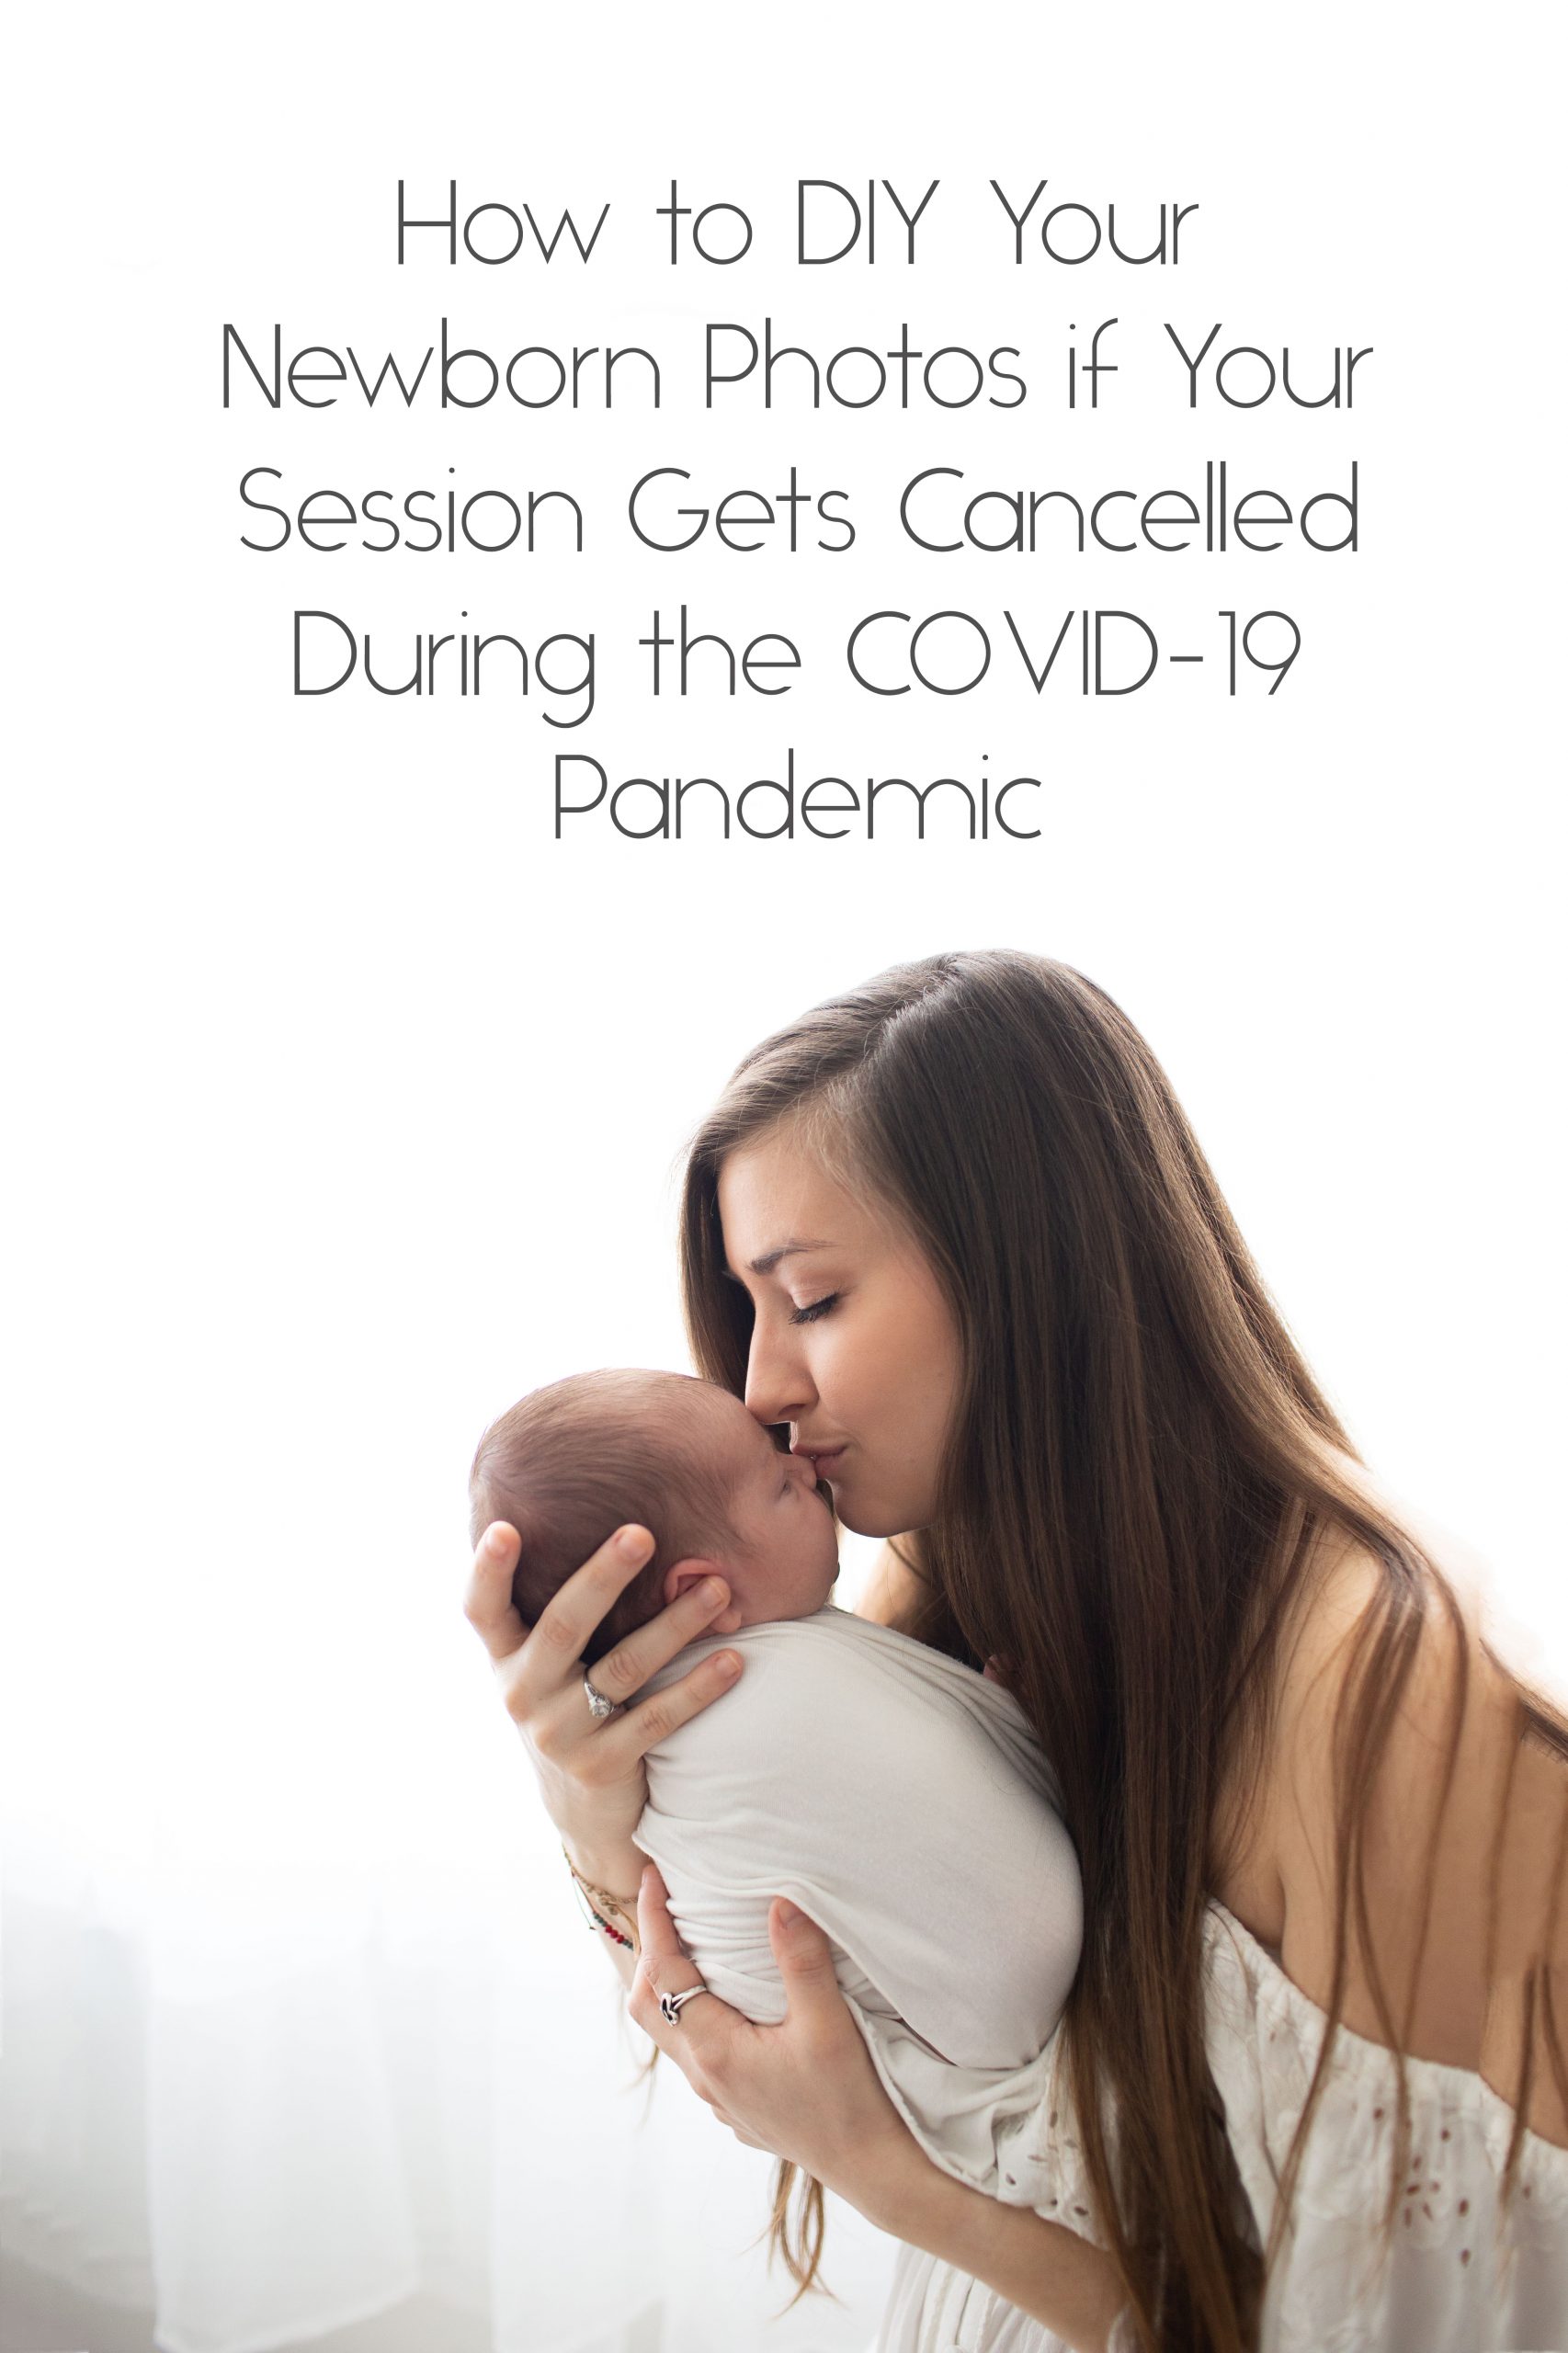 How to DIY Your Newborn Photos During the COVID-19 Pandemic